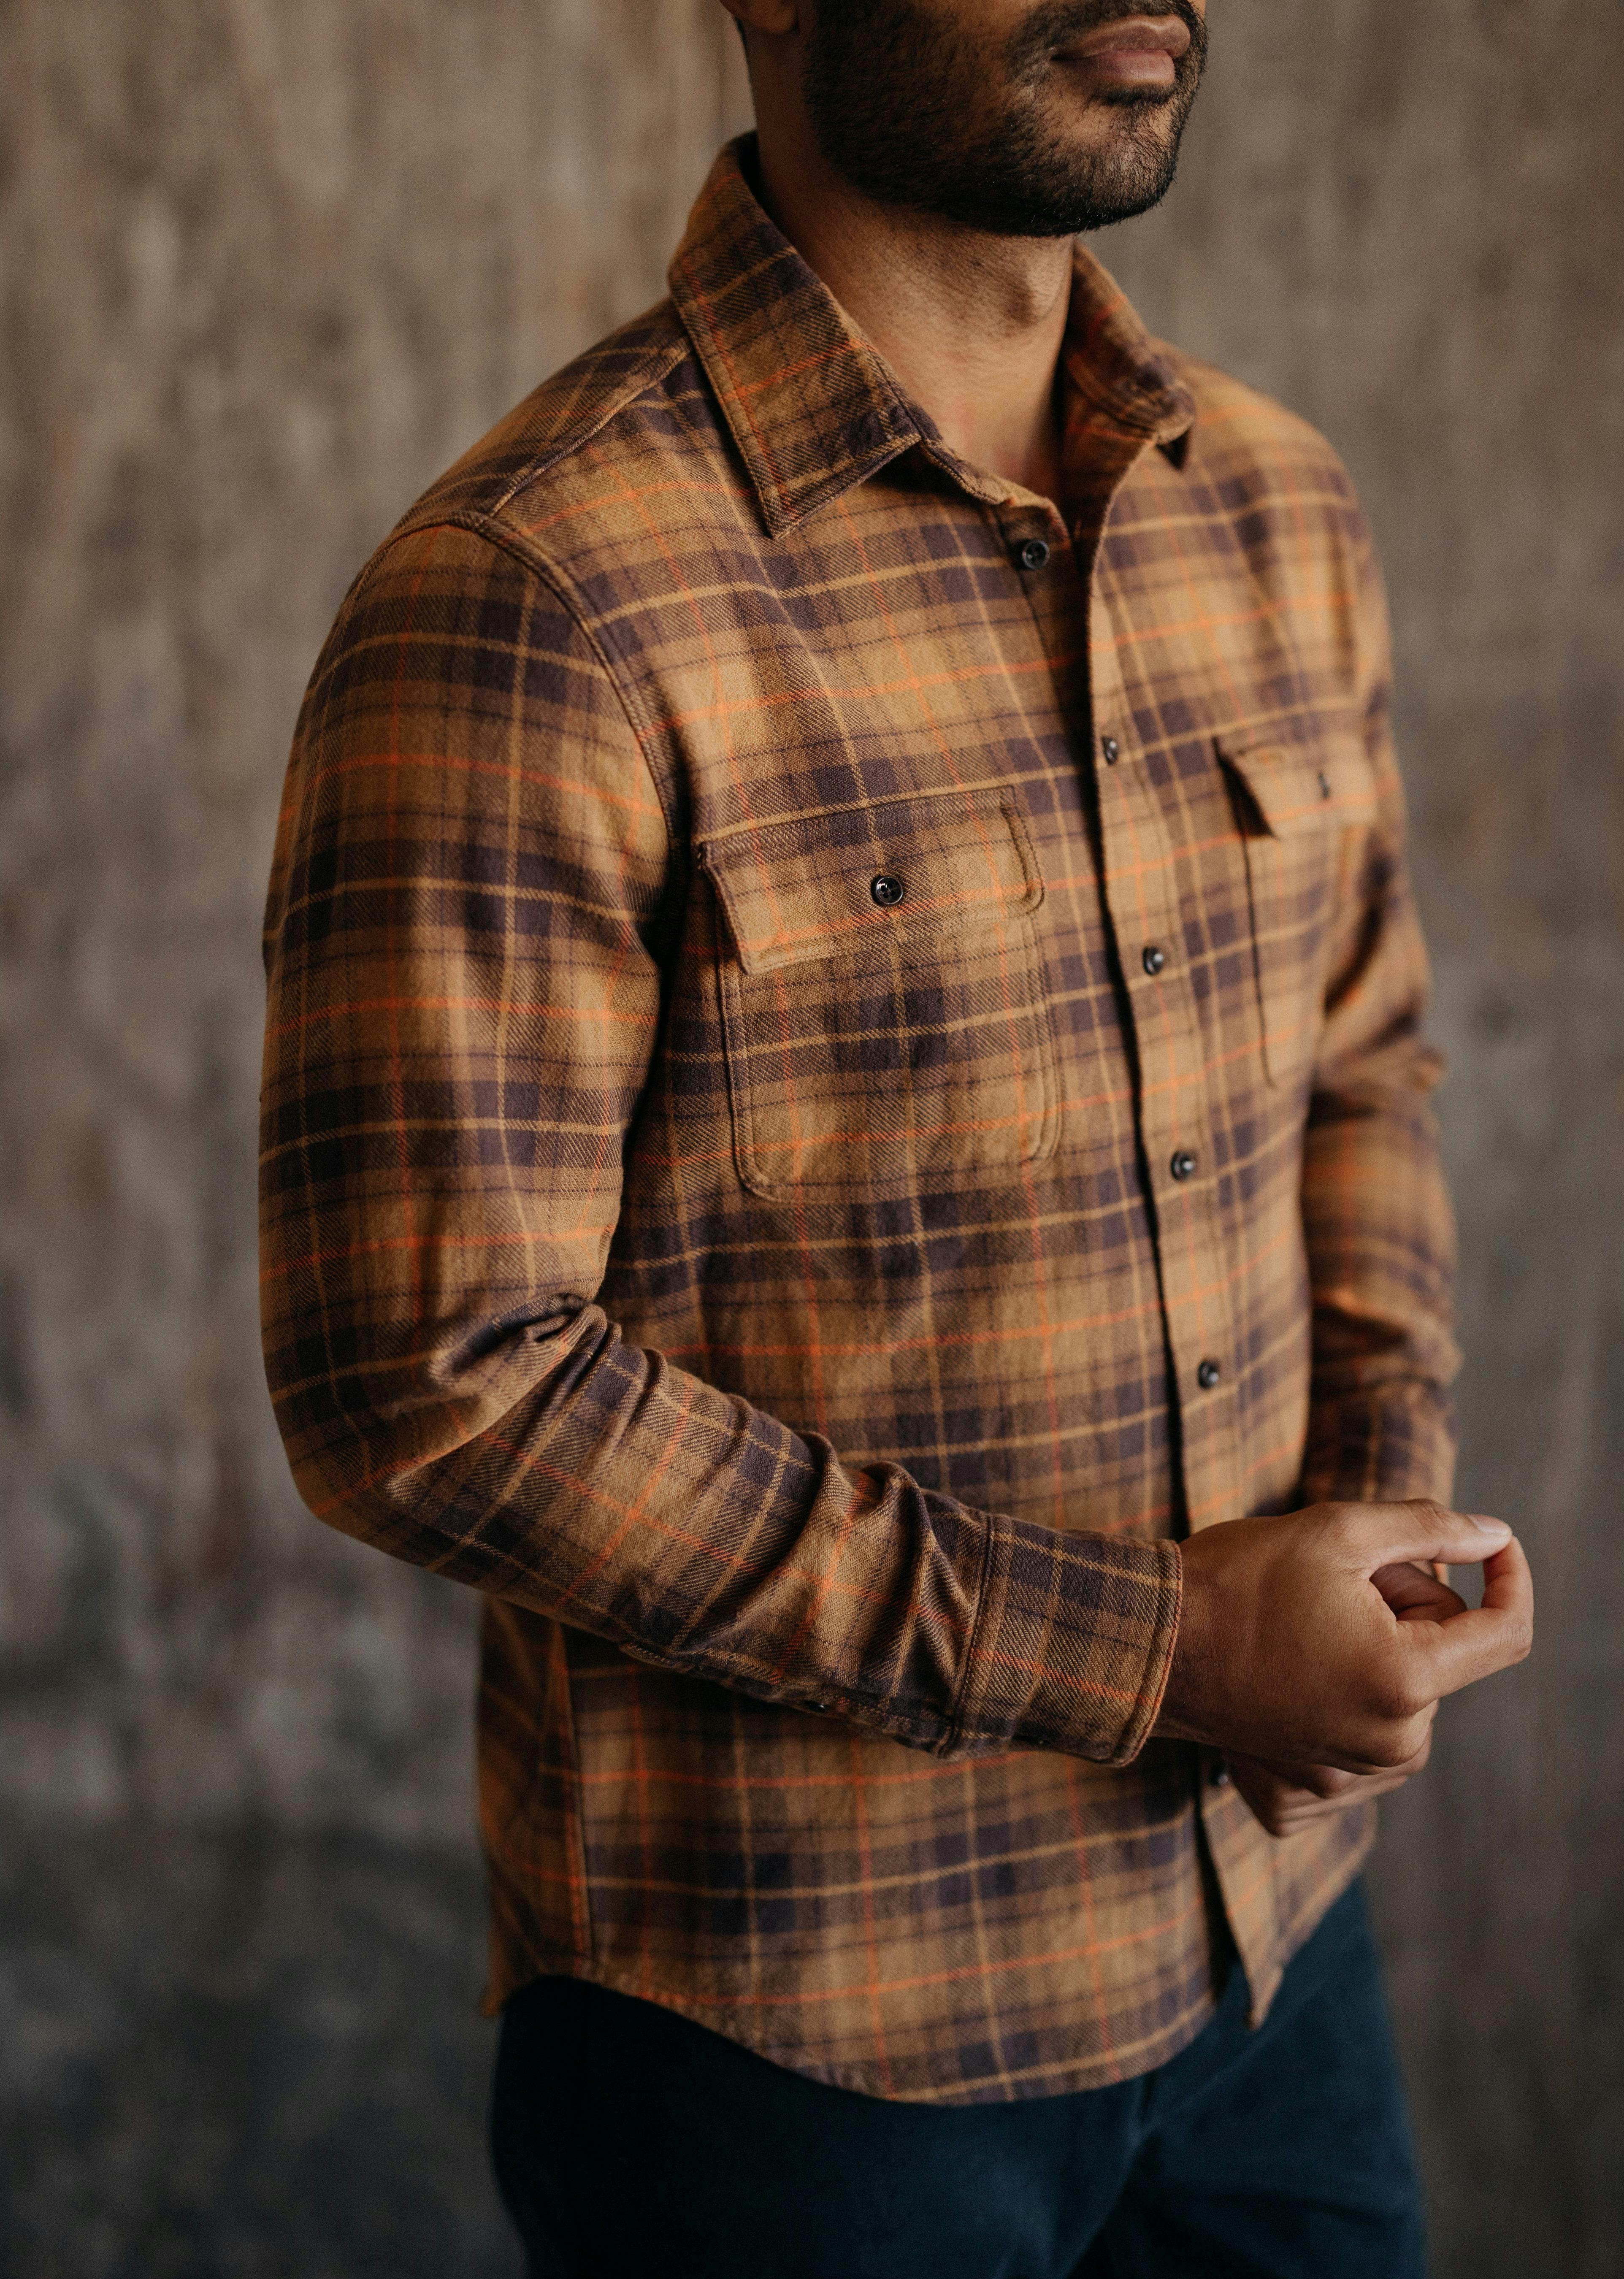 Taylor Stitch The Ledge Shirt in Brass Plaid